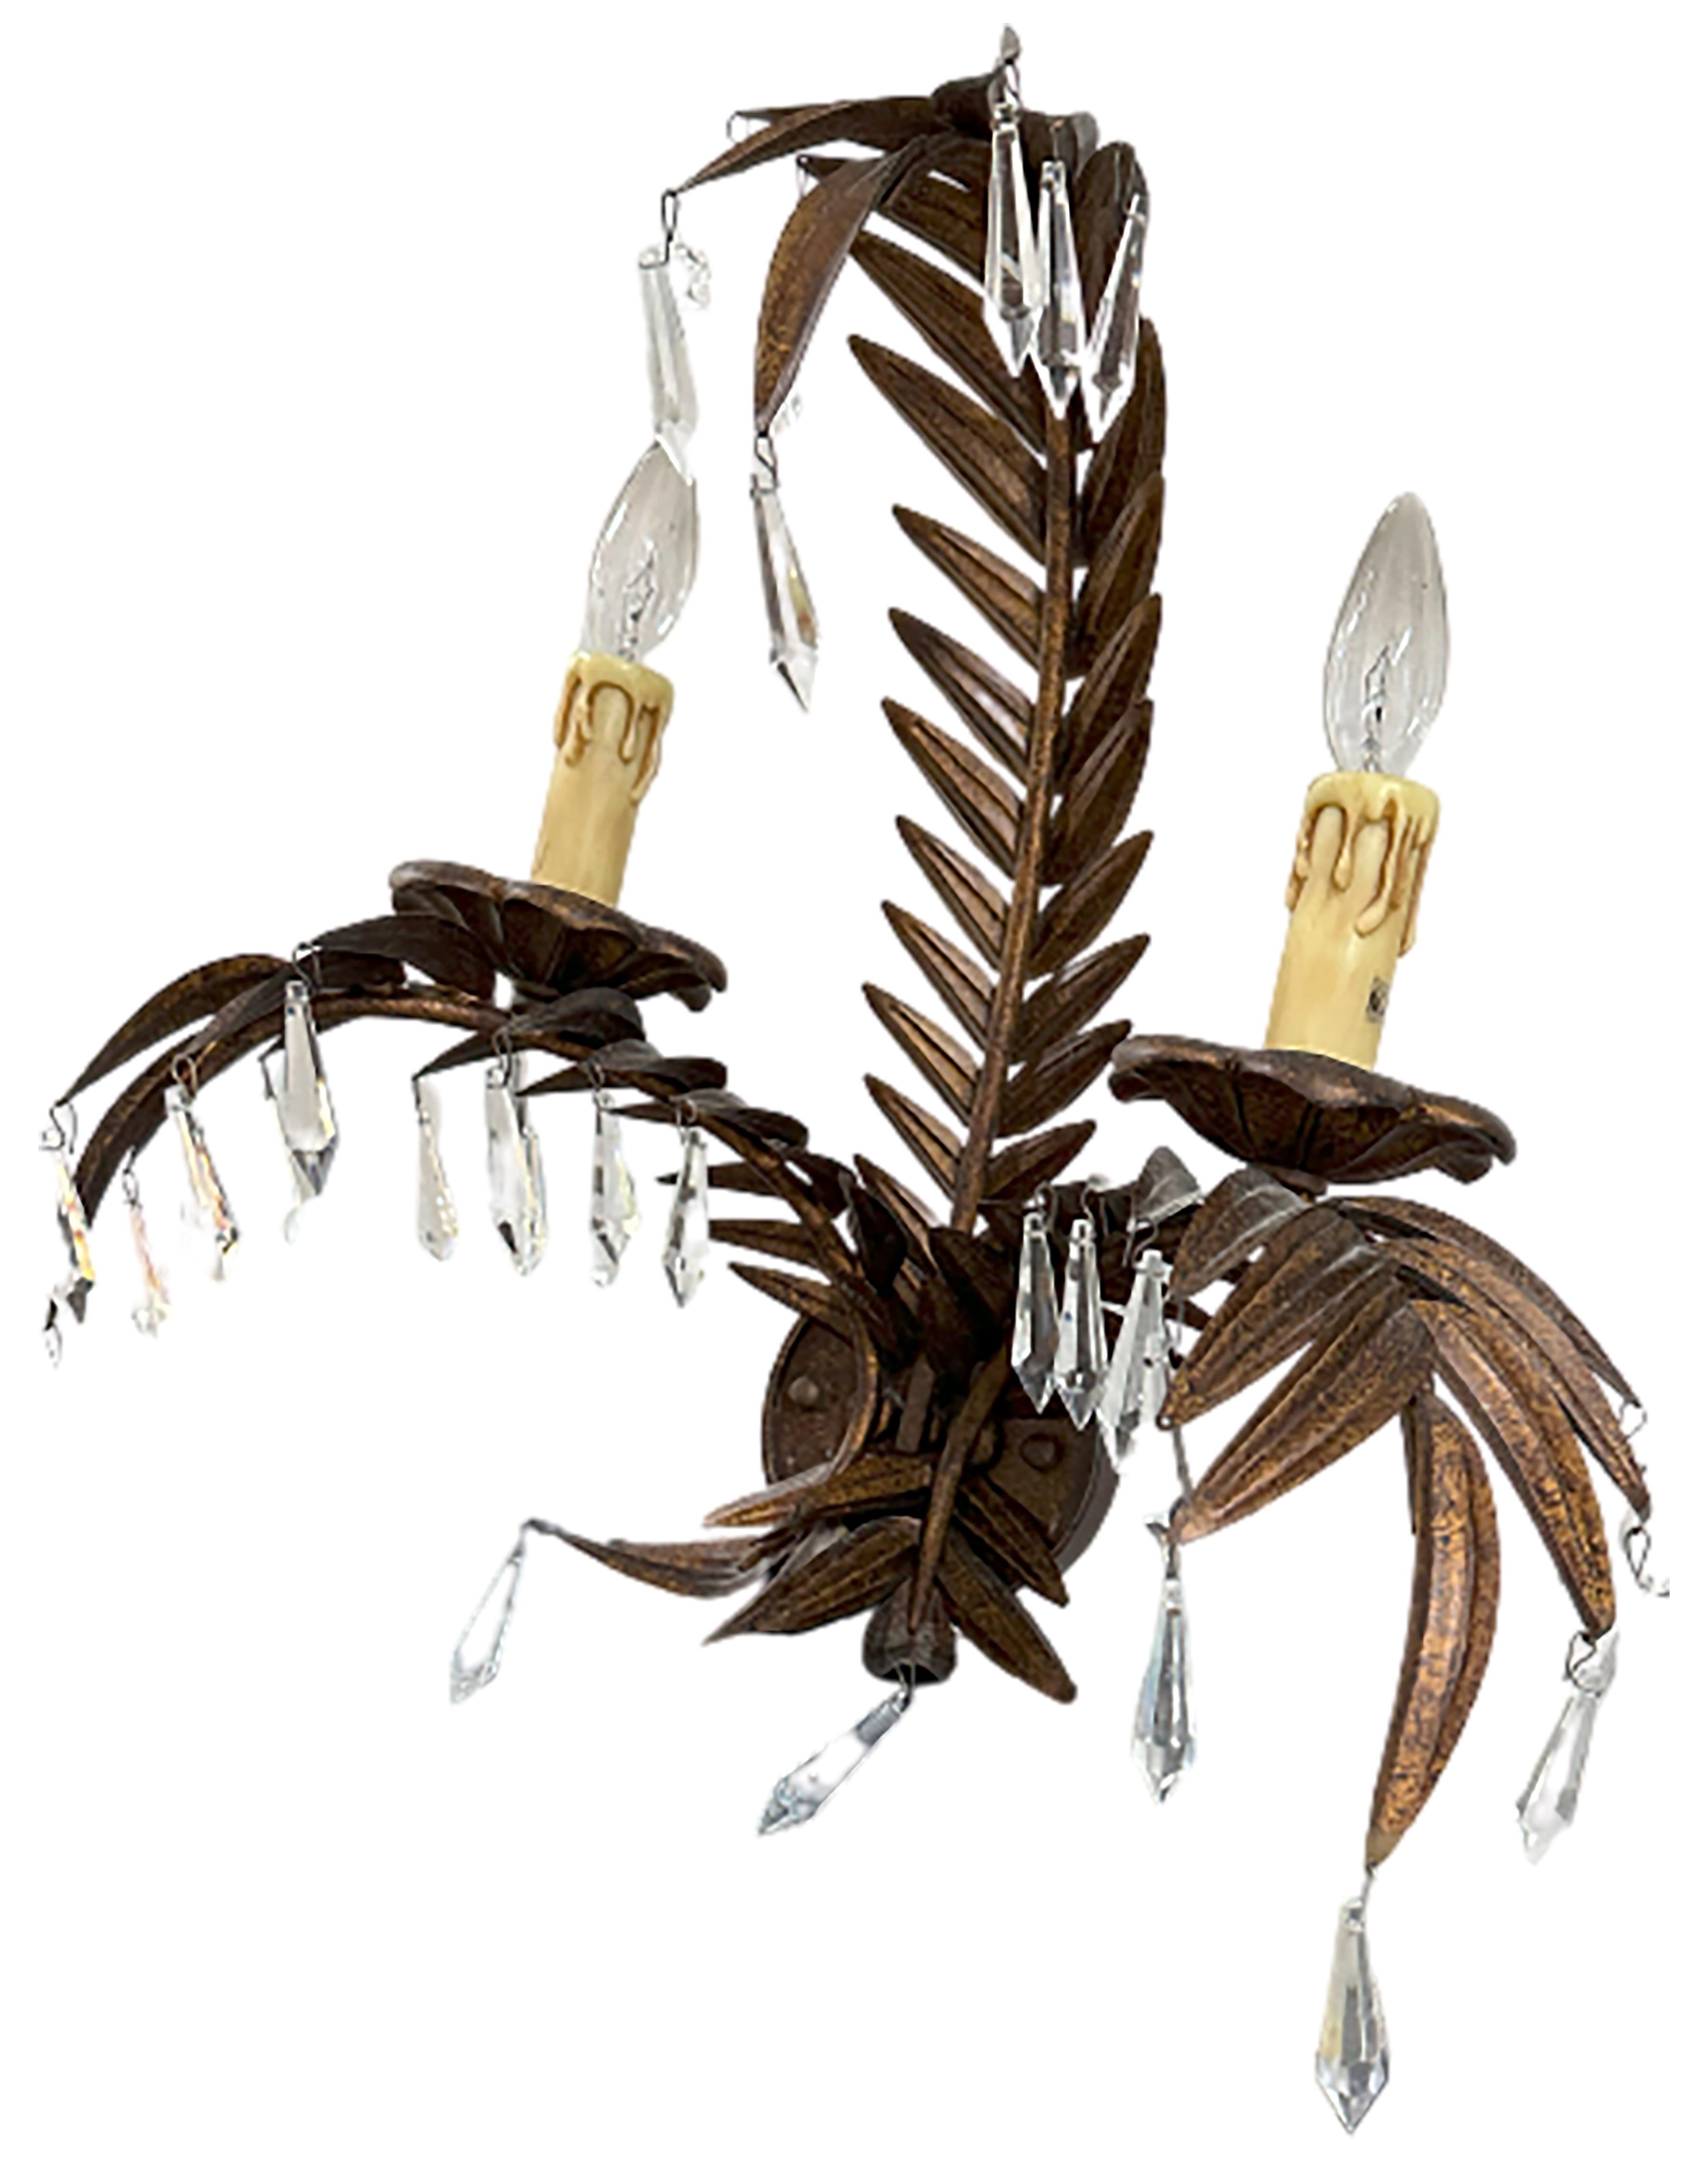 A handsome wall sconce. 21st century made. Hand cut glass crystal drops hanging from the palm fronds.

In good condition. Some gentle wear consistent with age and use.

No obvious markings on the piece. 

Would make a great addition to any living